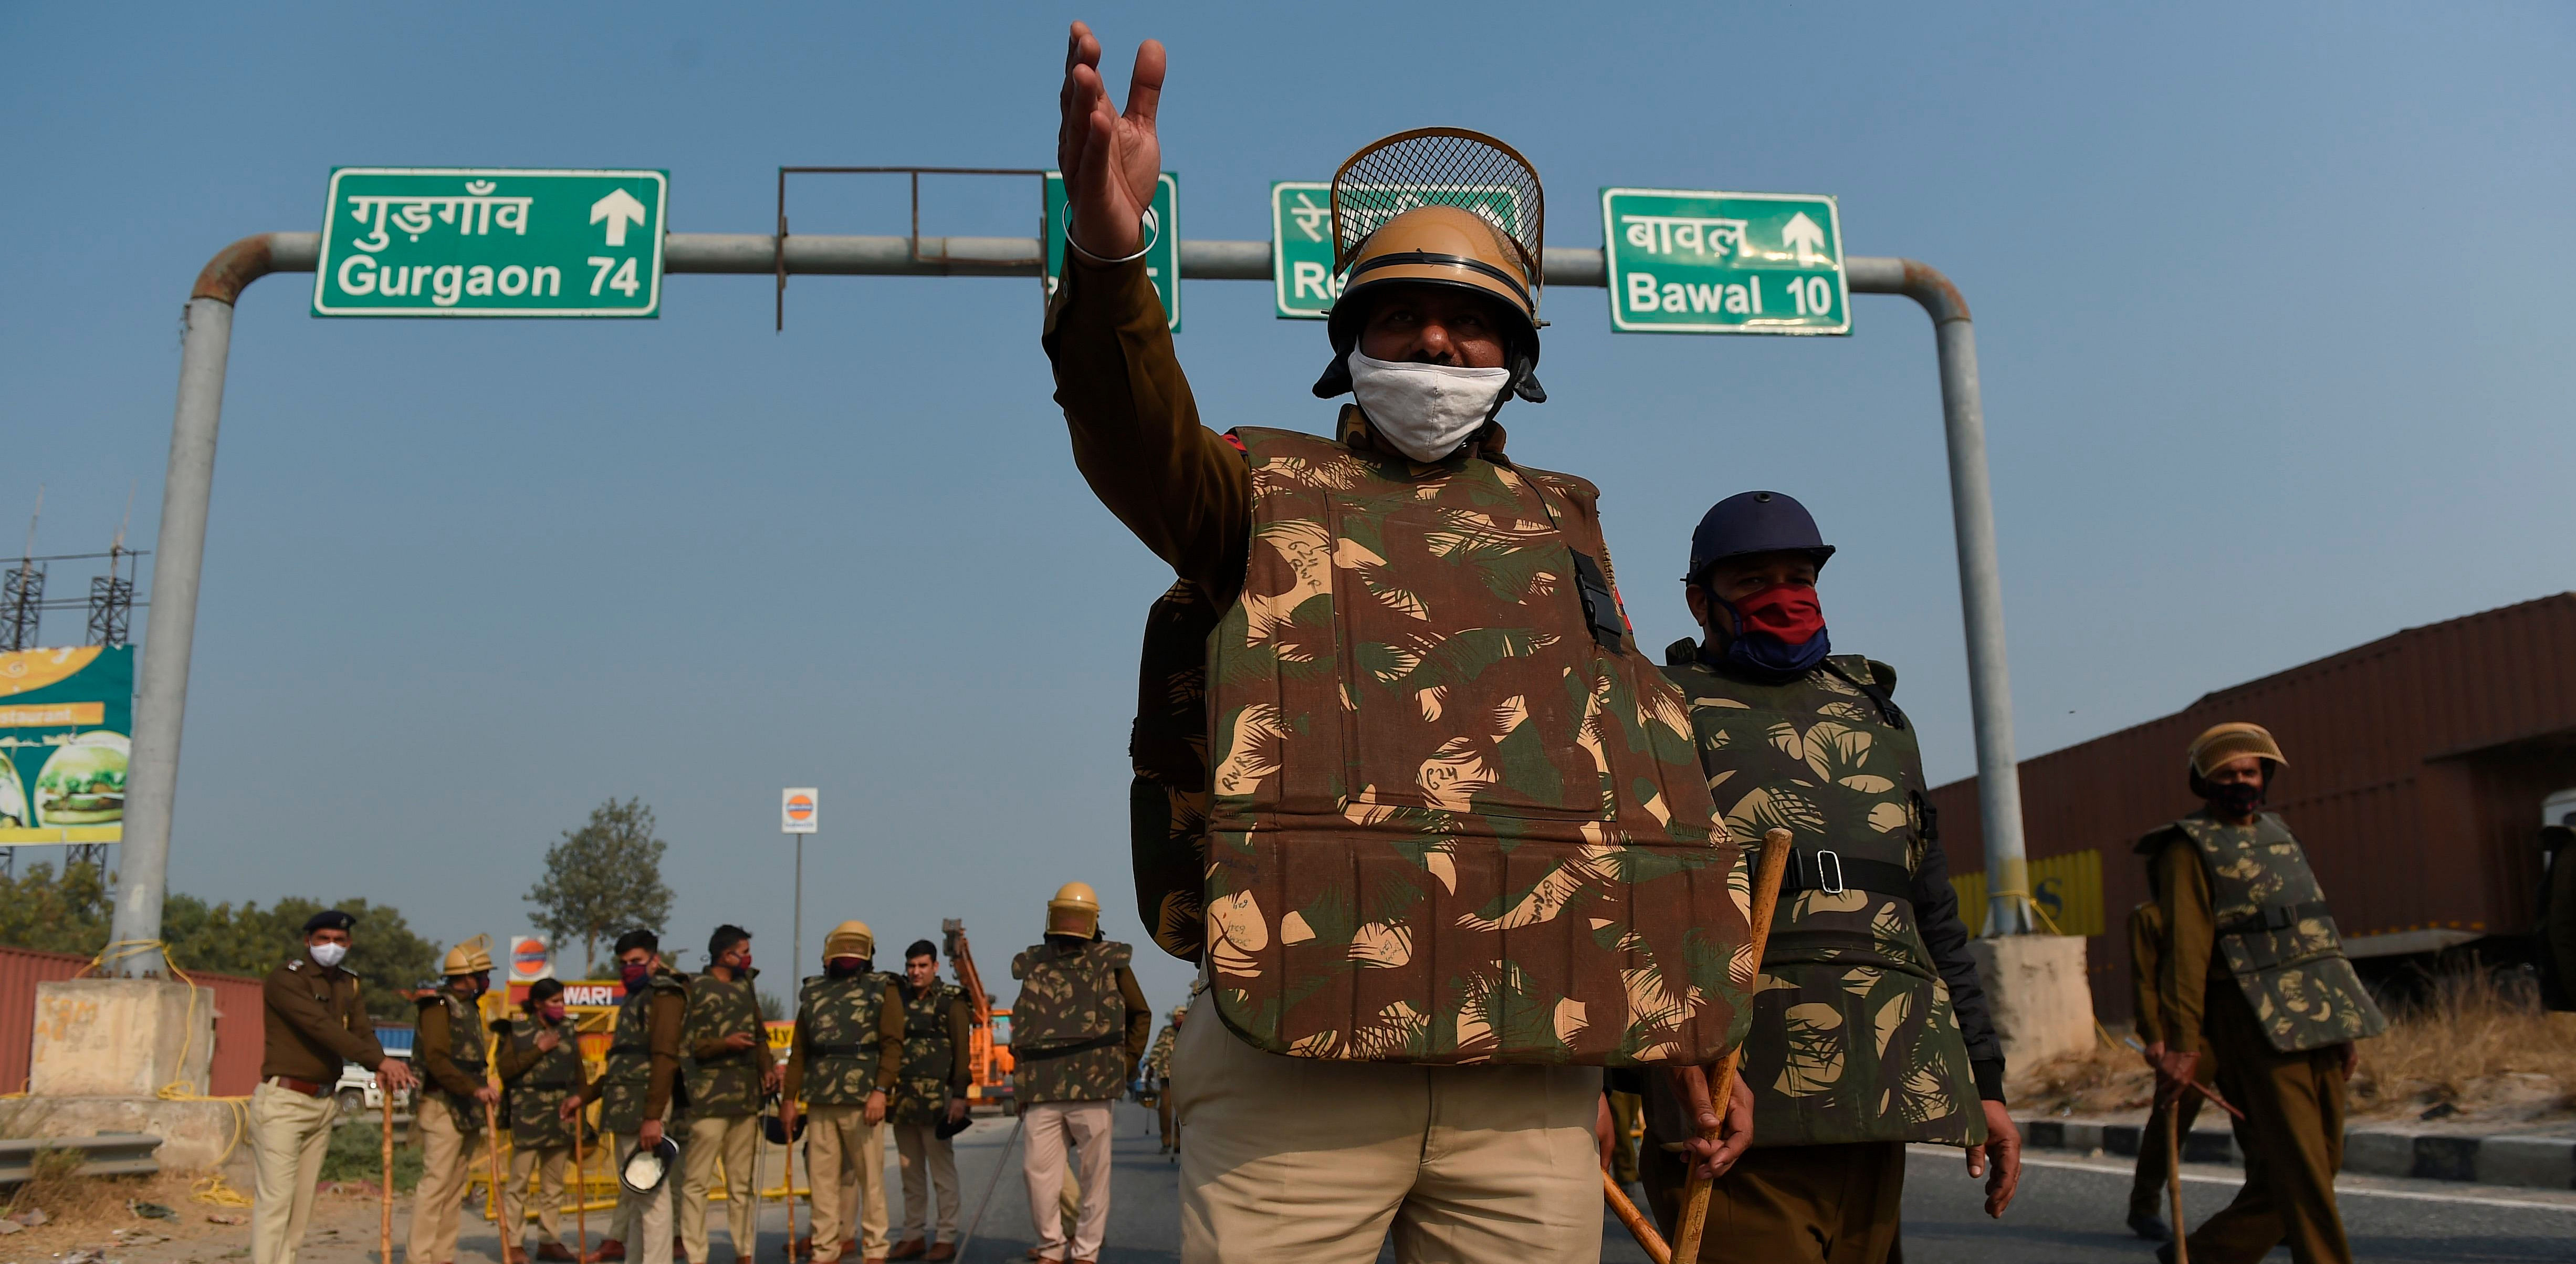 Police personnel stand along a highway on the Haryana-Rajasthan border to stop farmers from joining protests in Delhi against the recent agricultural reforms. Credit: AFP